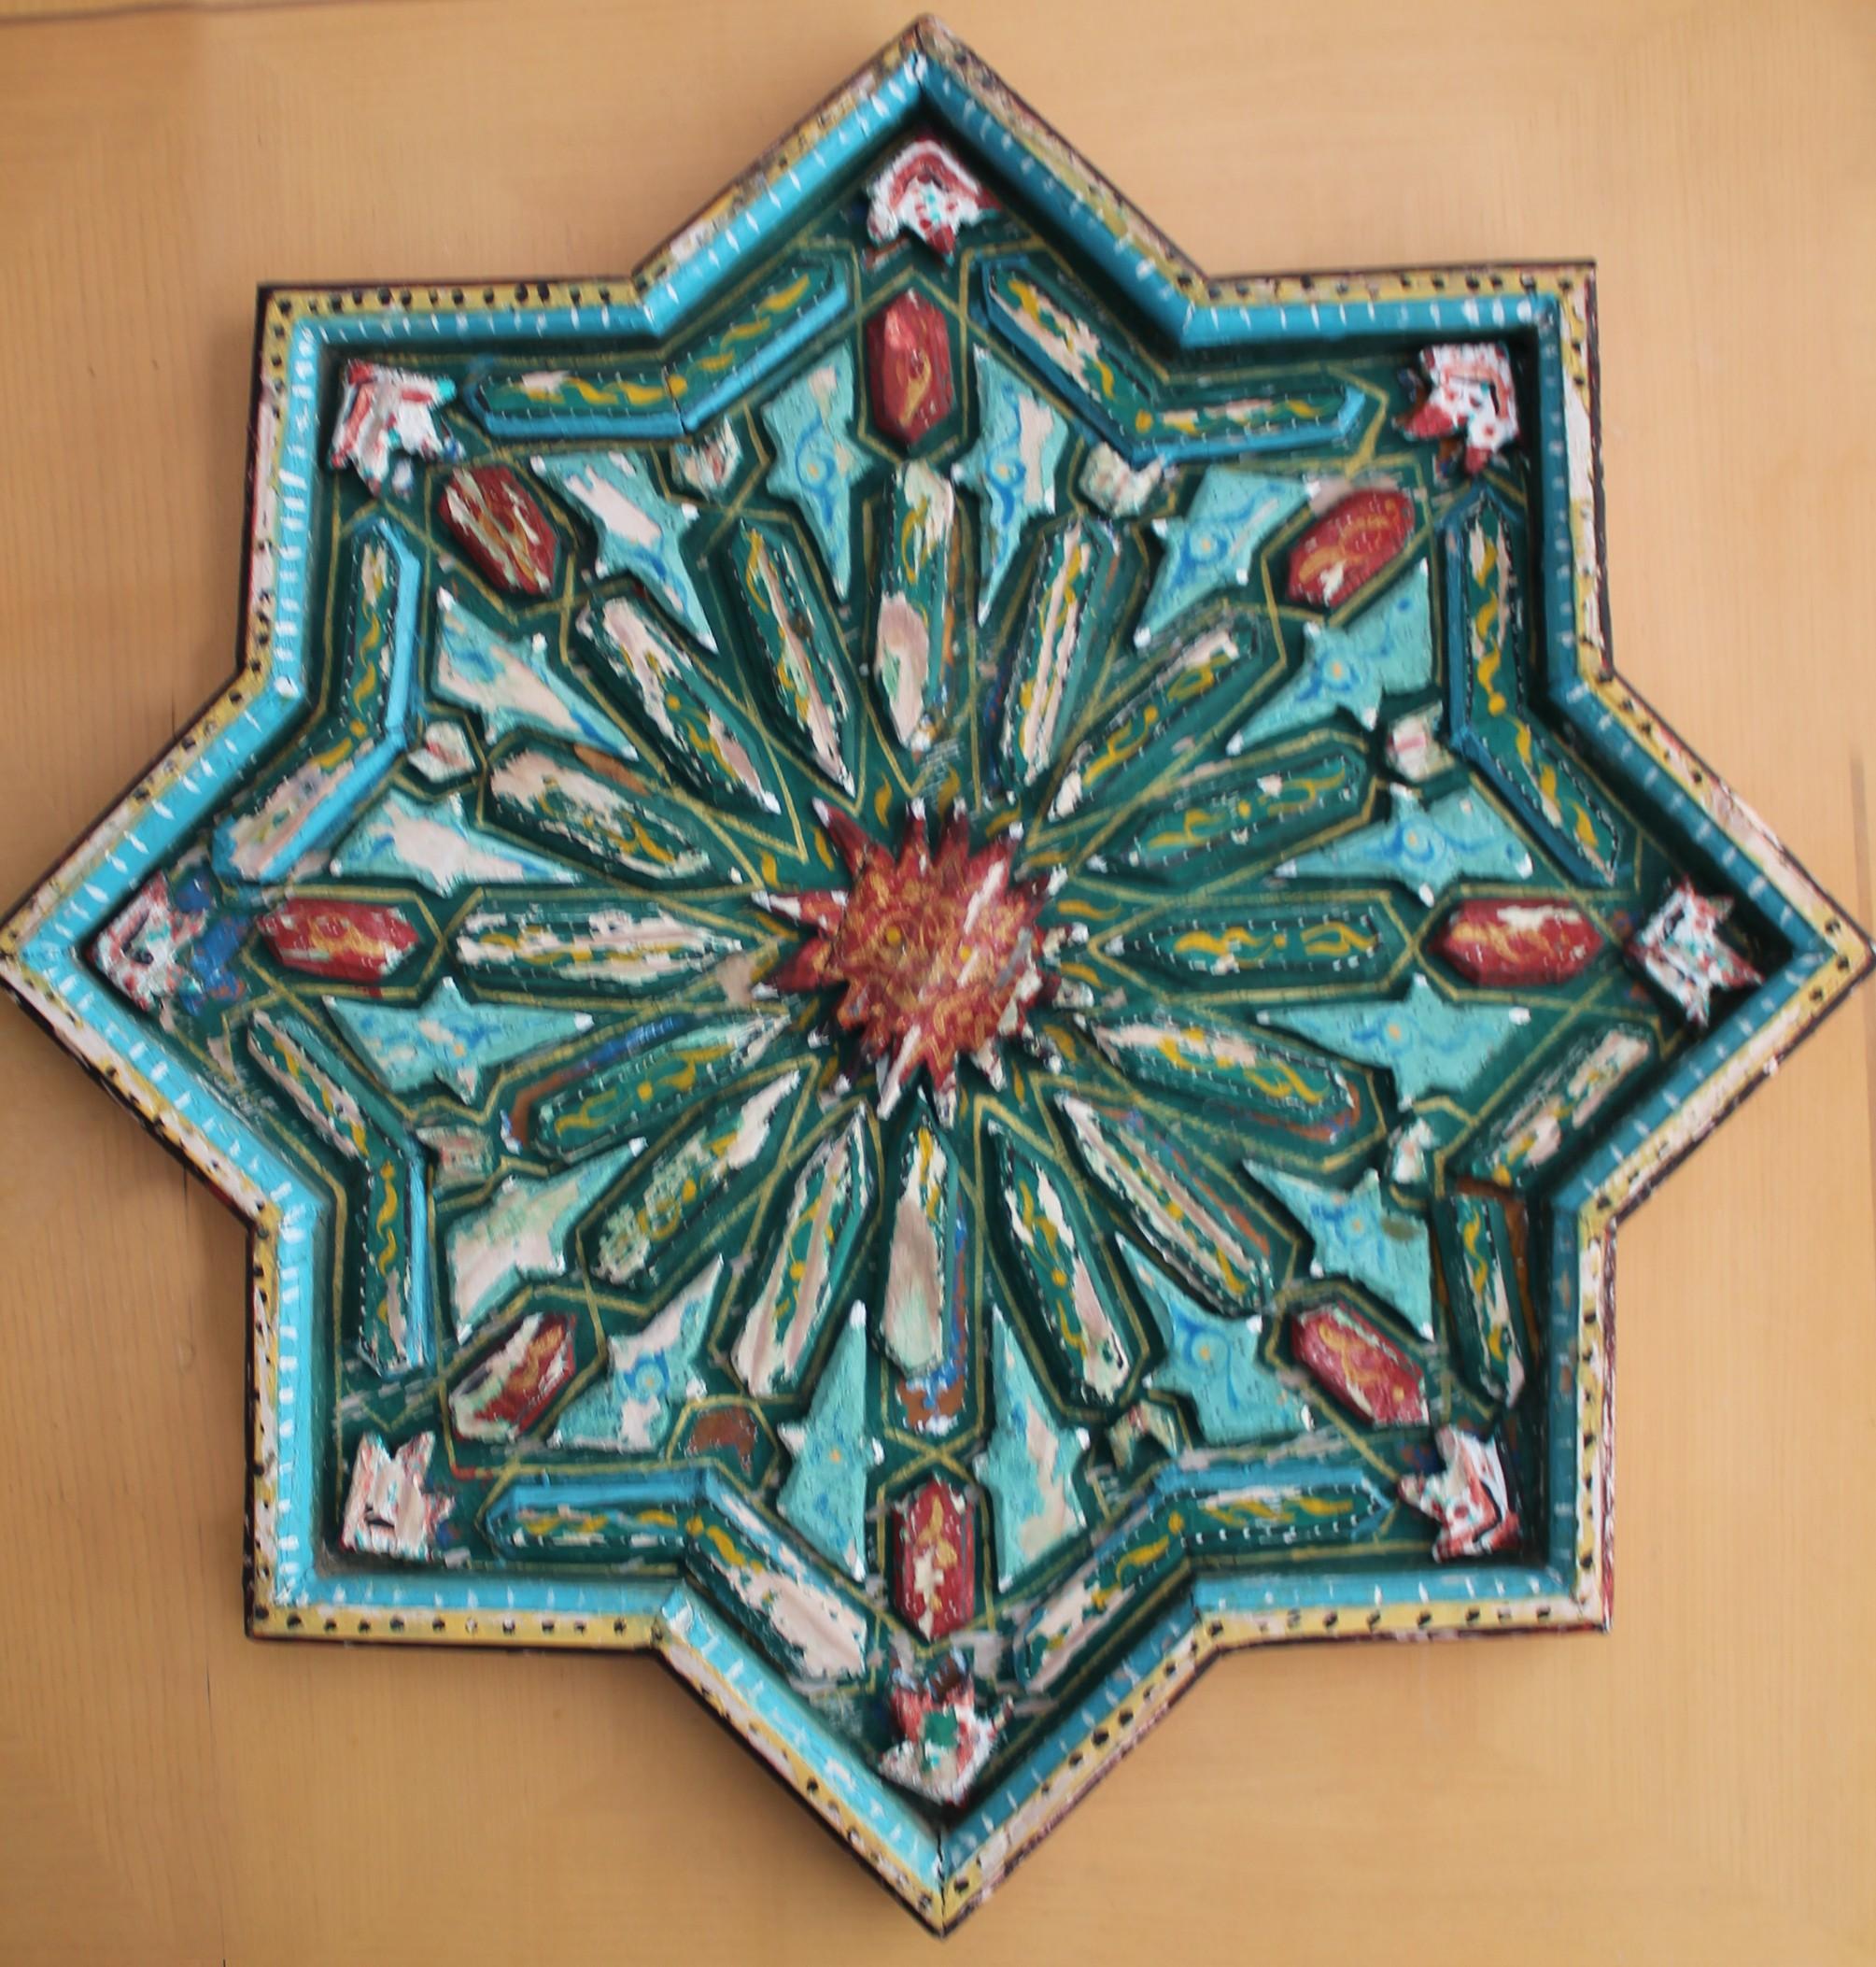 Wow!


Incredibly Rare
Mid Century Modern
8 pointed Star Wall Sculpture
Moroccan Art

Large & Impressive 32